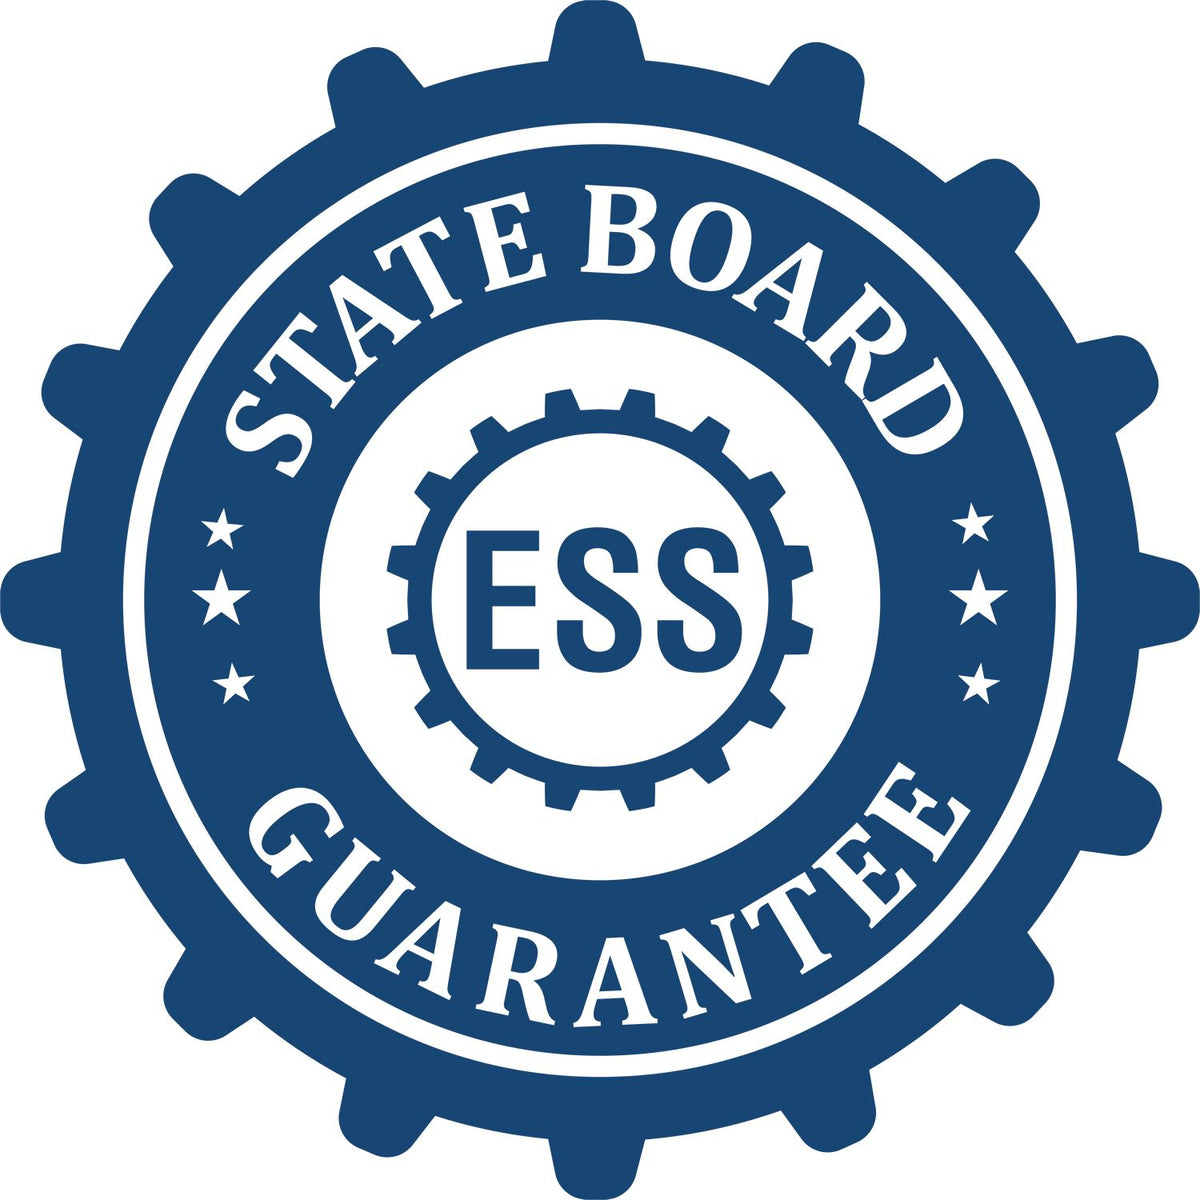 An emblem in a gear shape illustrating a state board guarantee for the Hybrid Tennessee Architect Seal